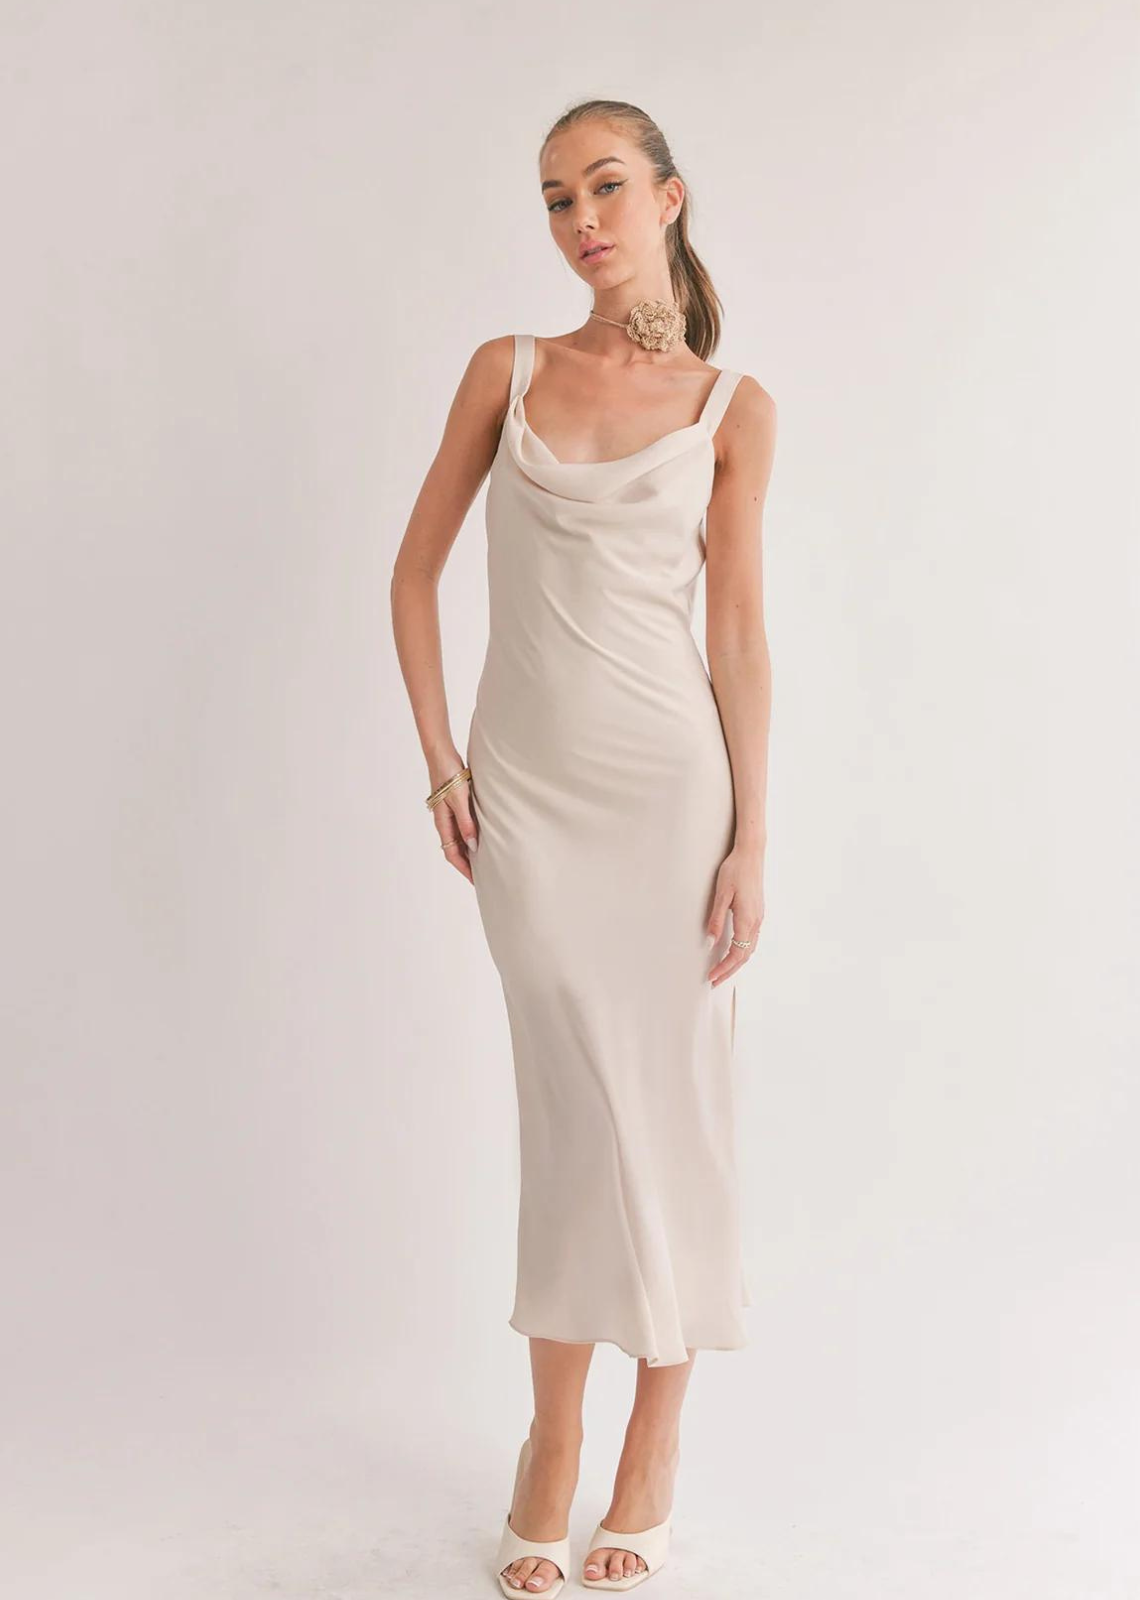 Sage The Label Dream Skies Low Back Cowl Midi Dress. Midi Dress Cowl Neck Low Back SELF: 100% Polyester LINING: 92% Polyester 8% Spandex Style # LG1332